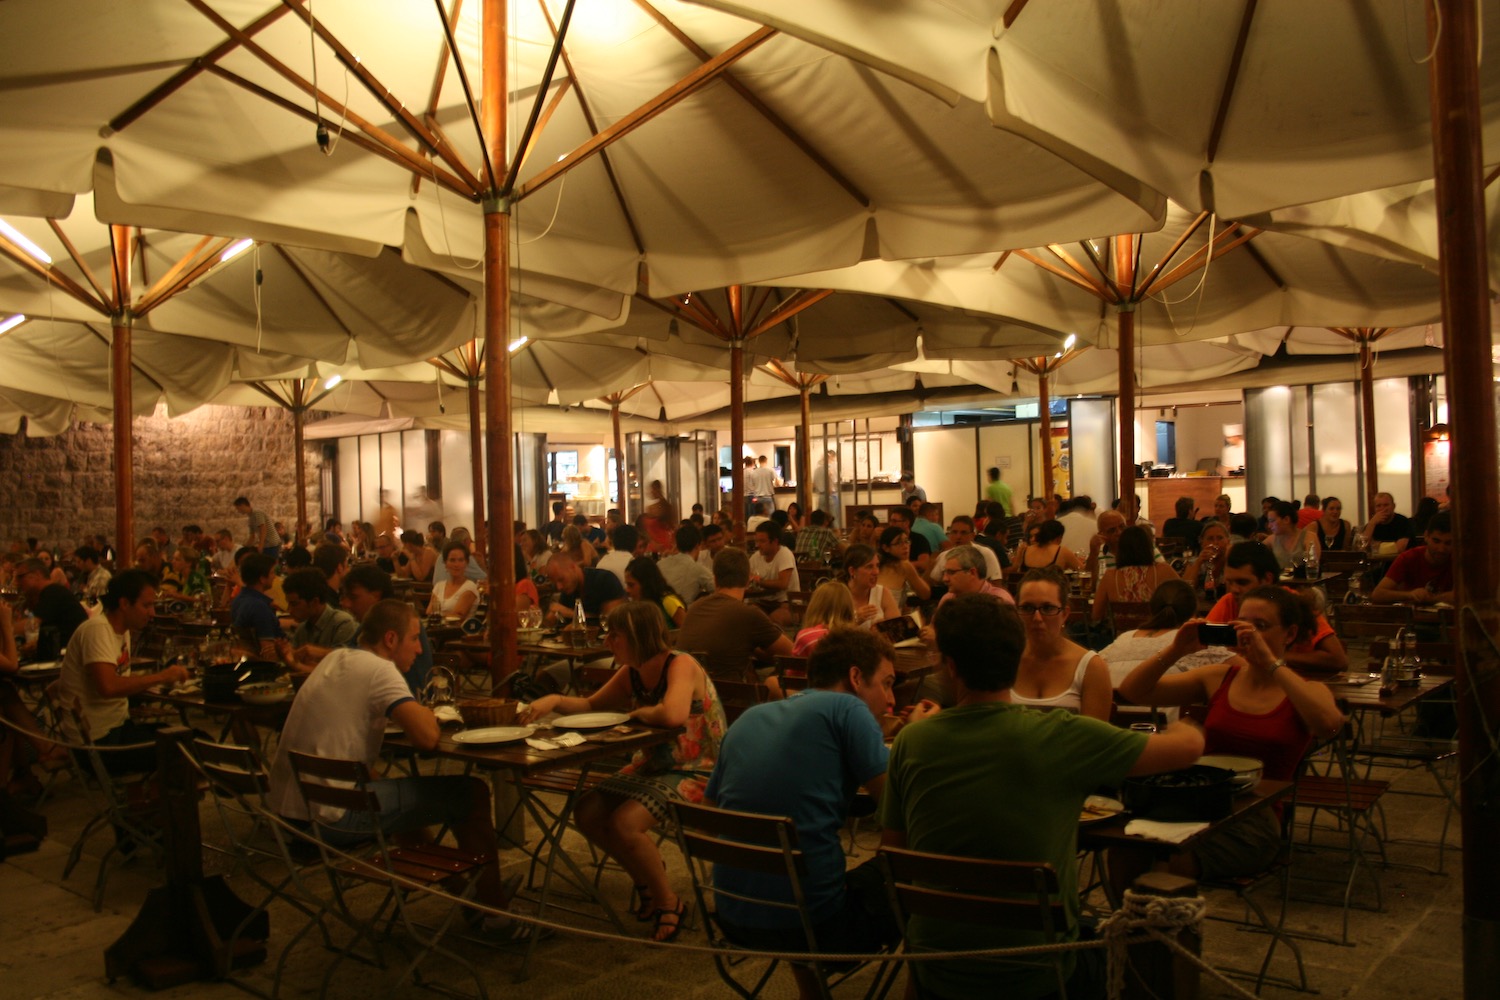 a group of people sitting at tables under a large umbrella